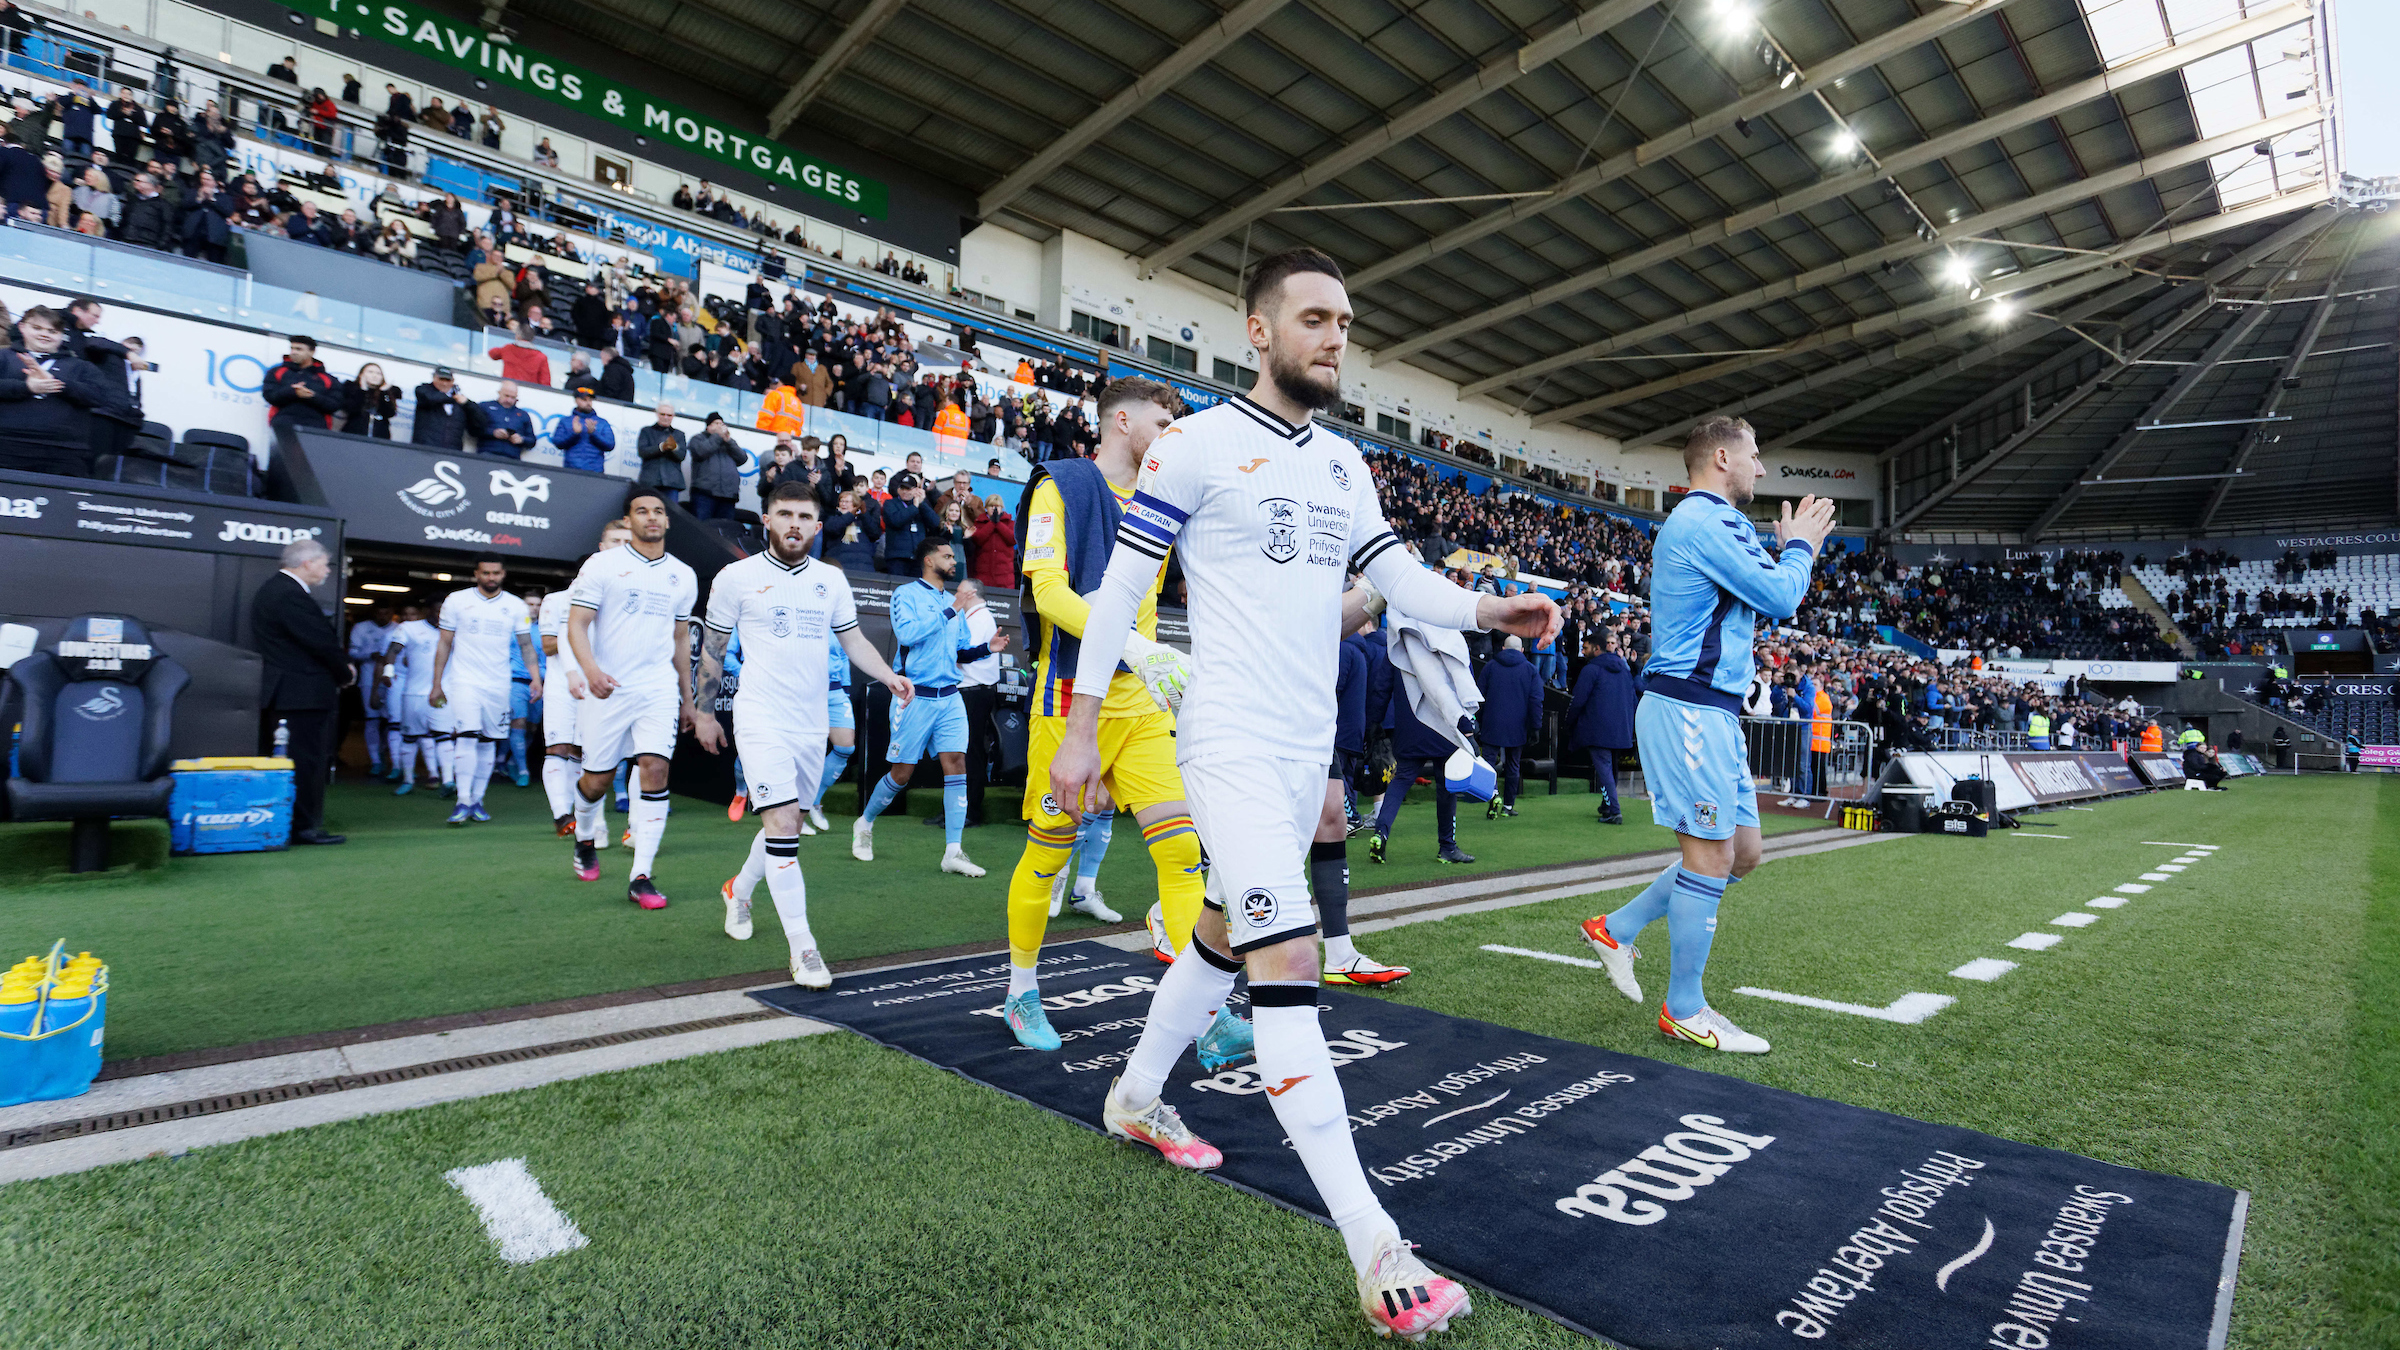 Coventry City home walk out